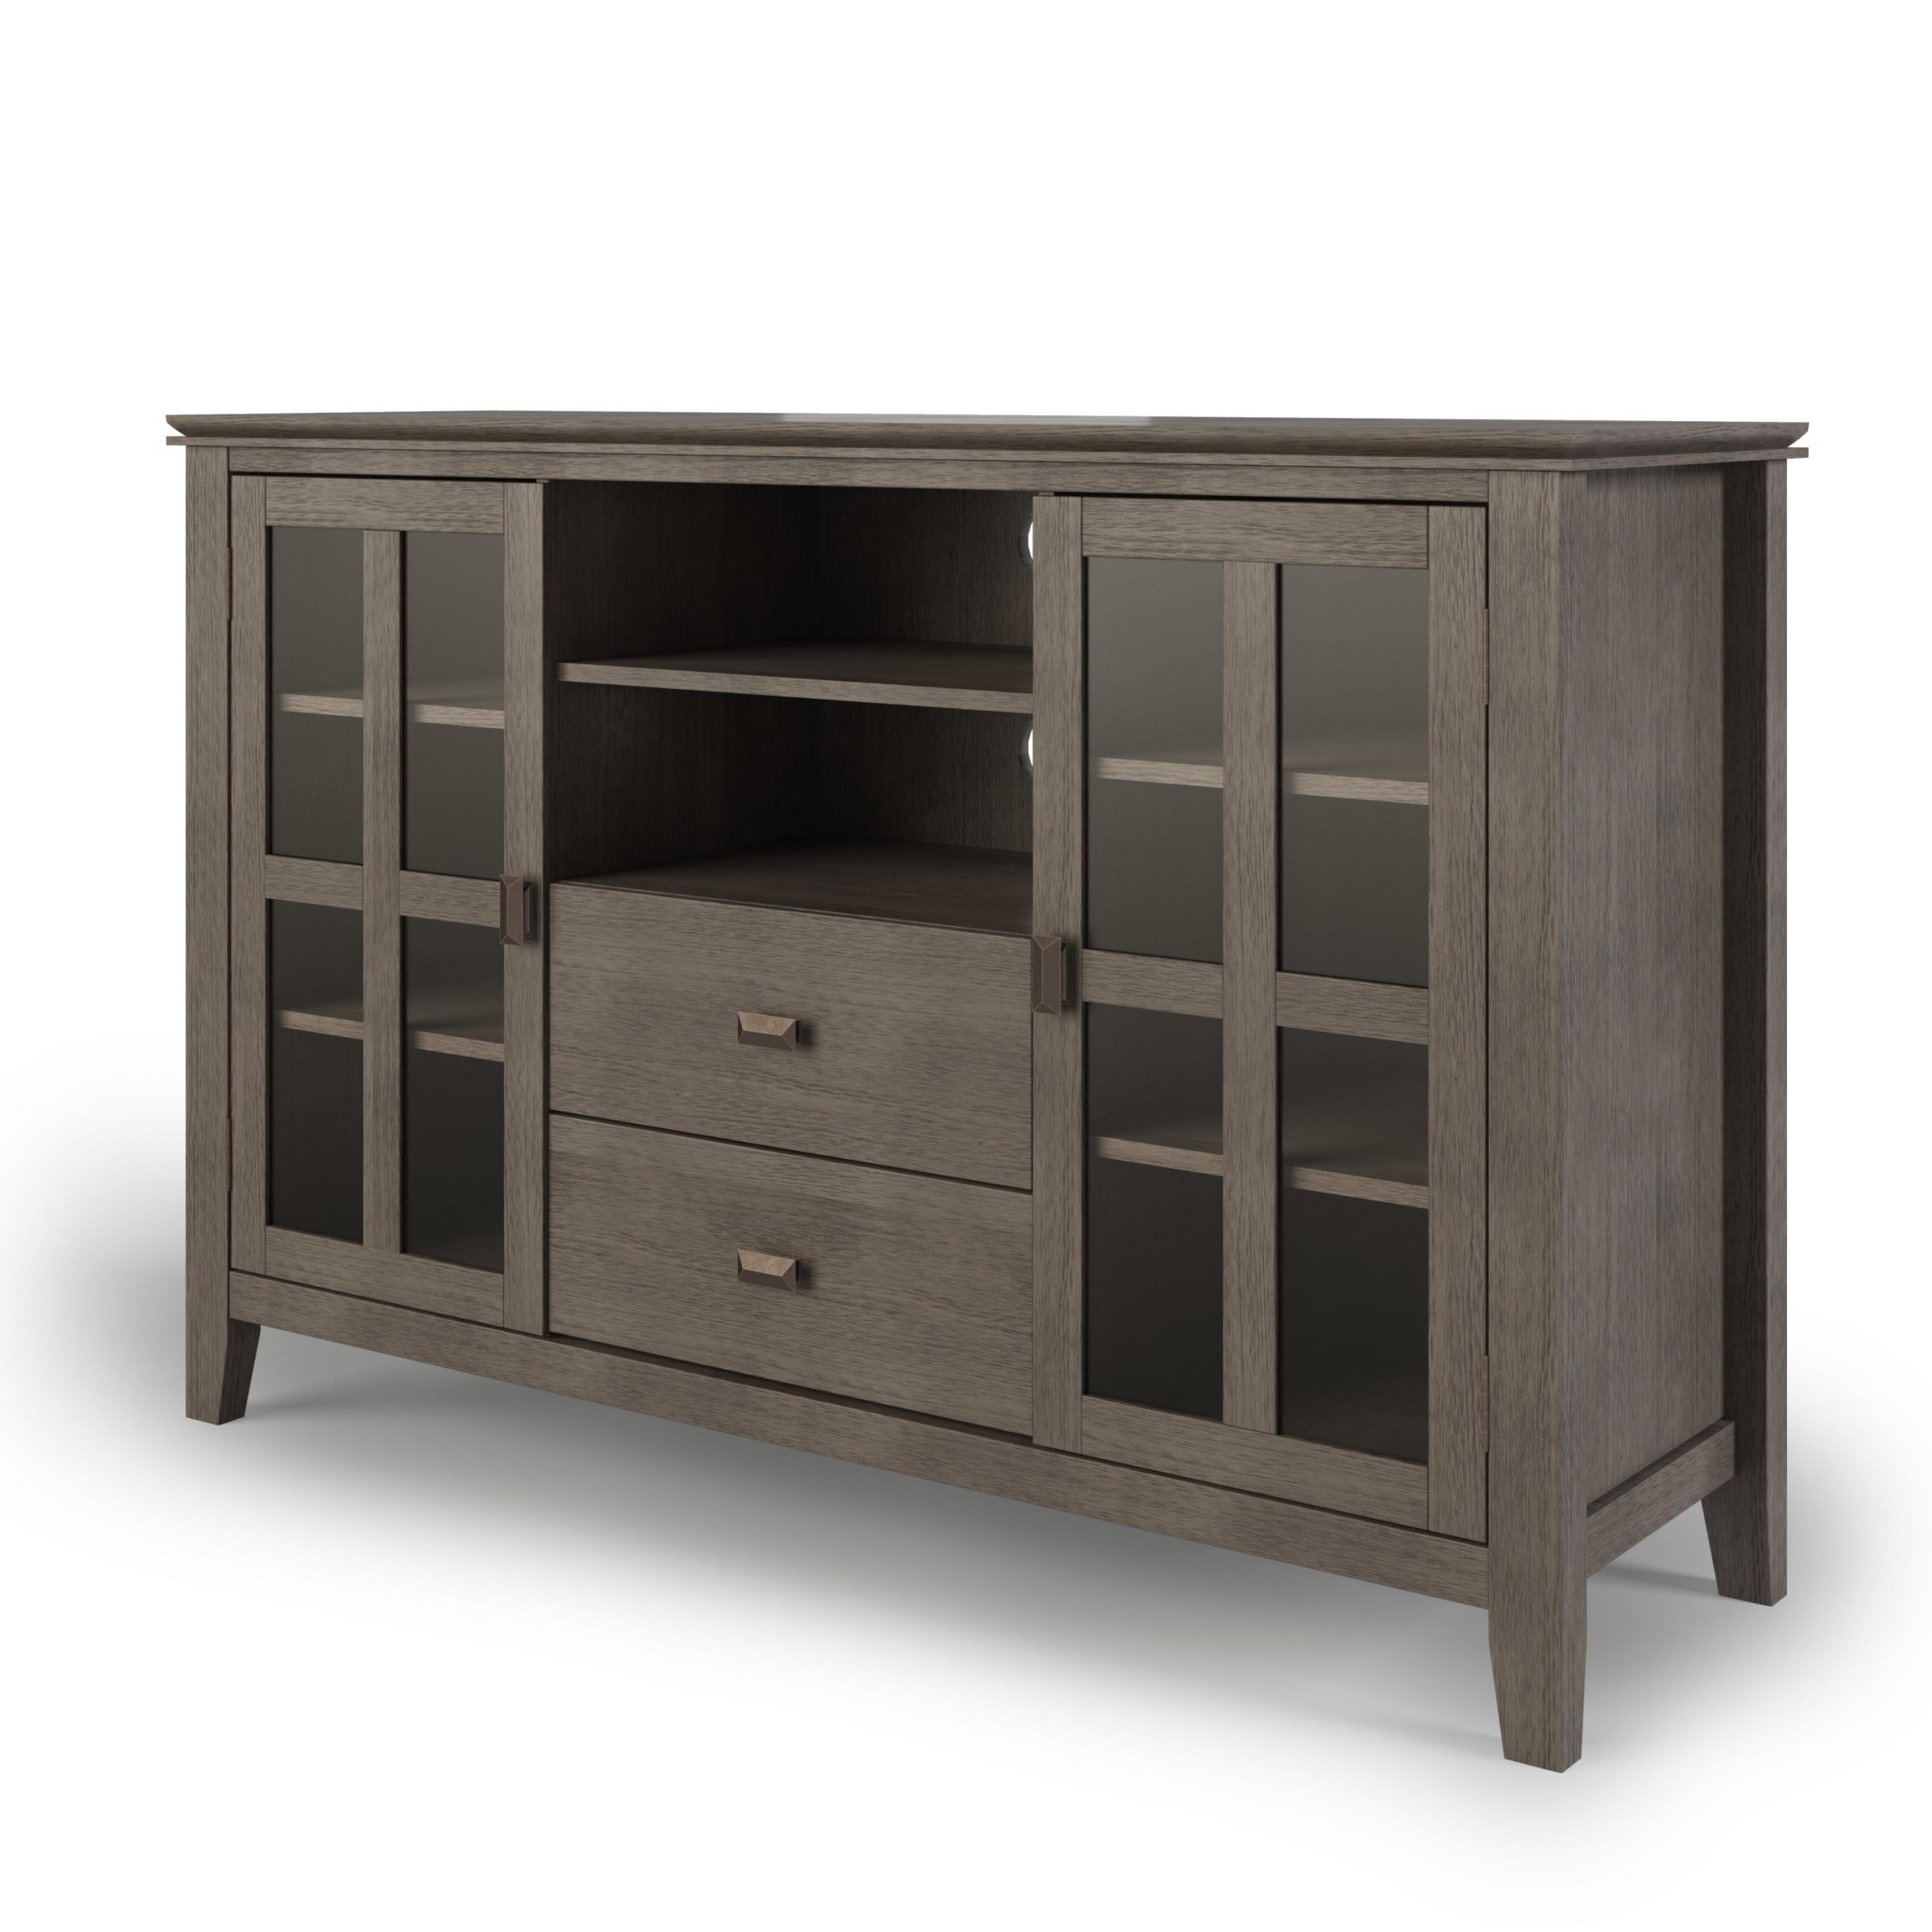 Artisan Solid Wood 53 Inch Wide Contemporary Tv Media For Greenwich Wide Tv Stands (View 9 of 20)